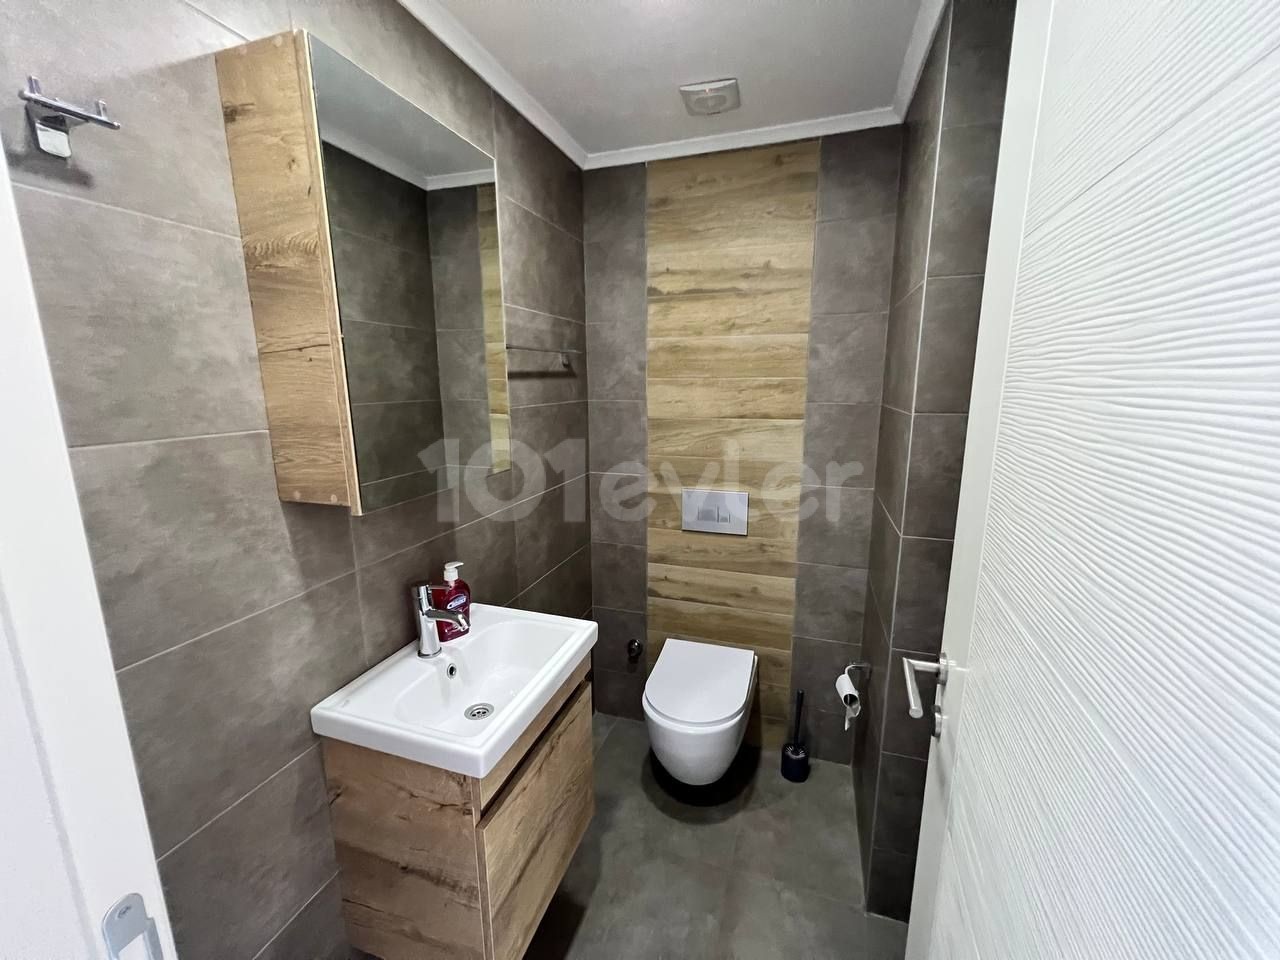 Studio flat for sale in the center of Famagusta